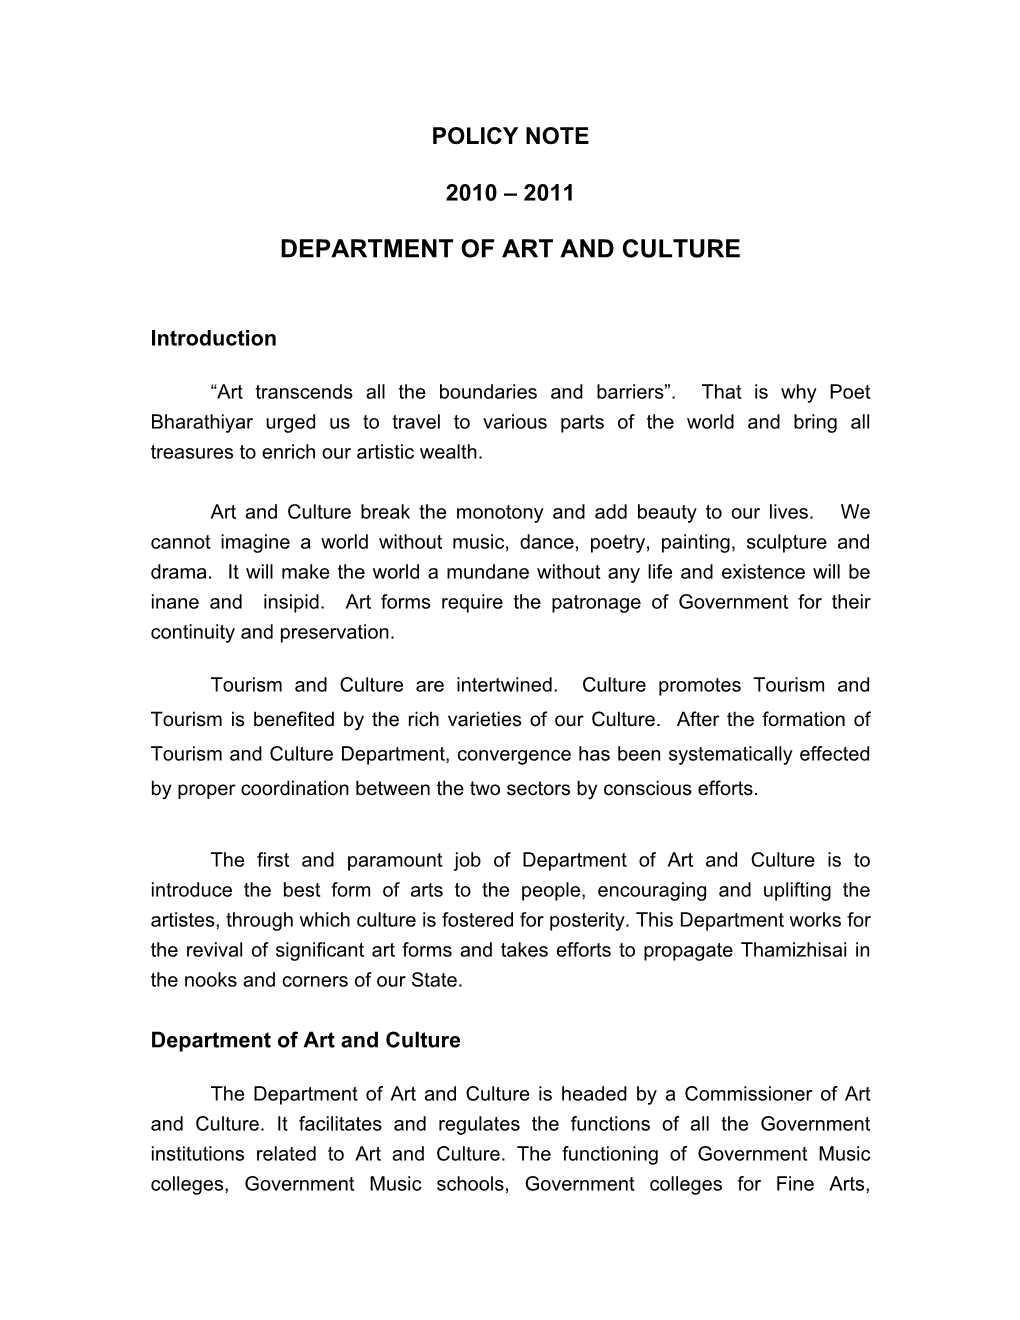 Department of Art and Culture